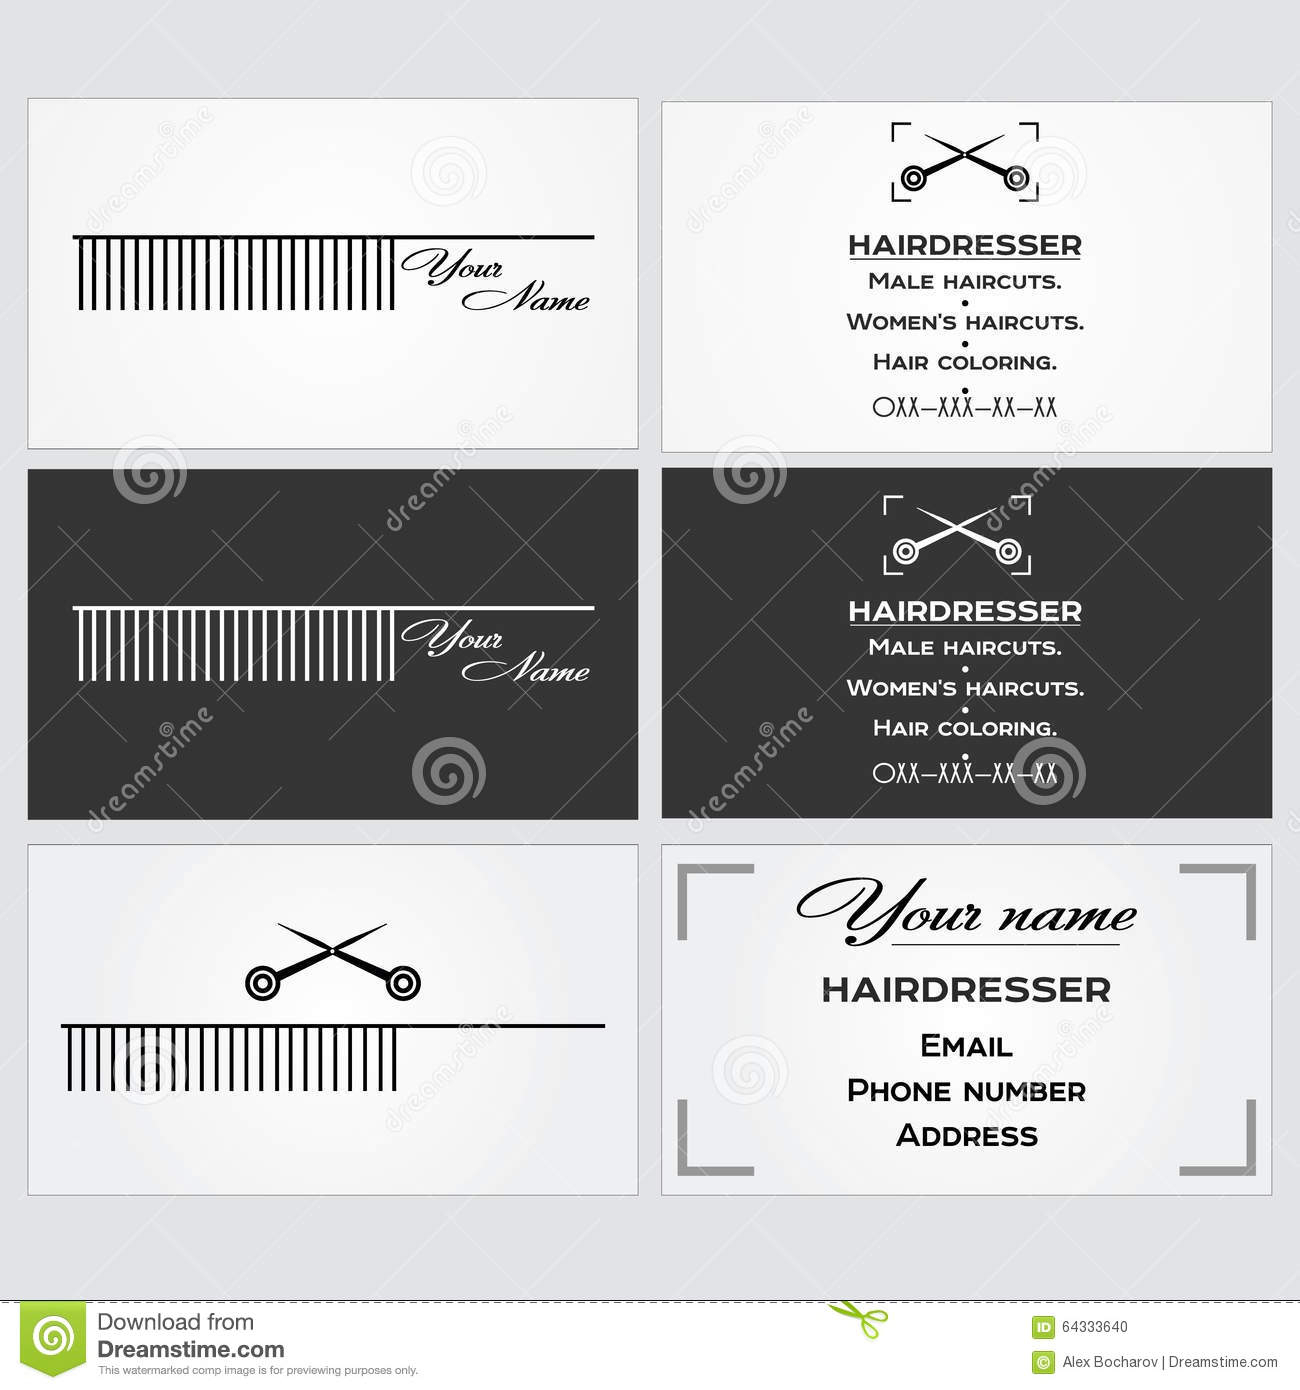 Business Card Template For A Hairdresser. Stock Vector Within Hairdresser Business Card Templates Free